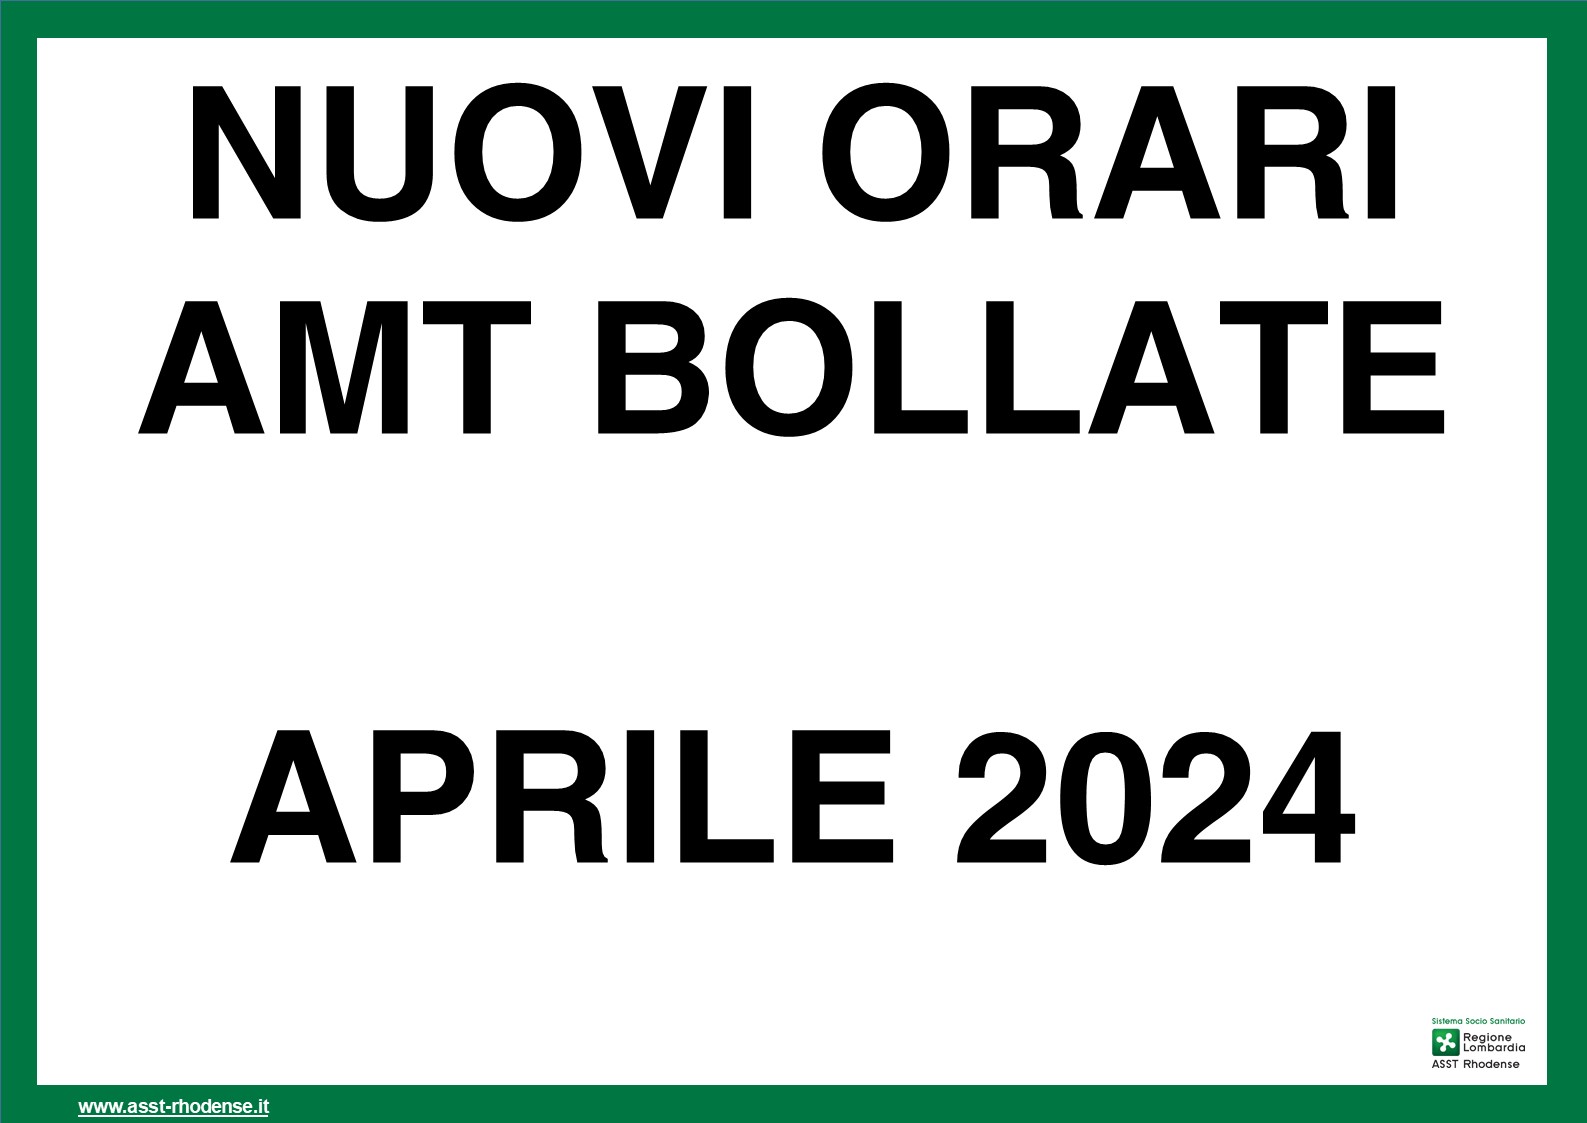 AMT BOLLATE APRILE 2024